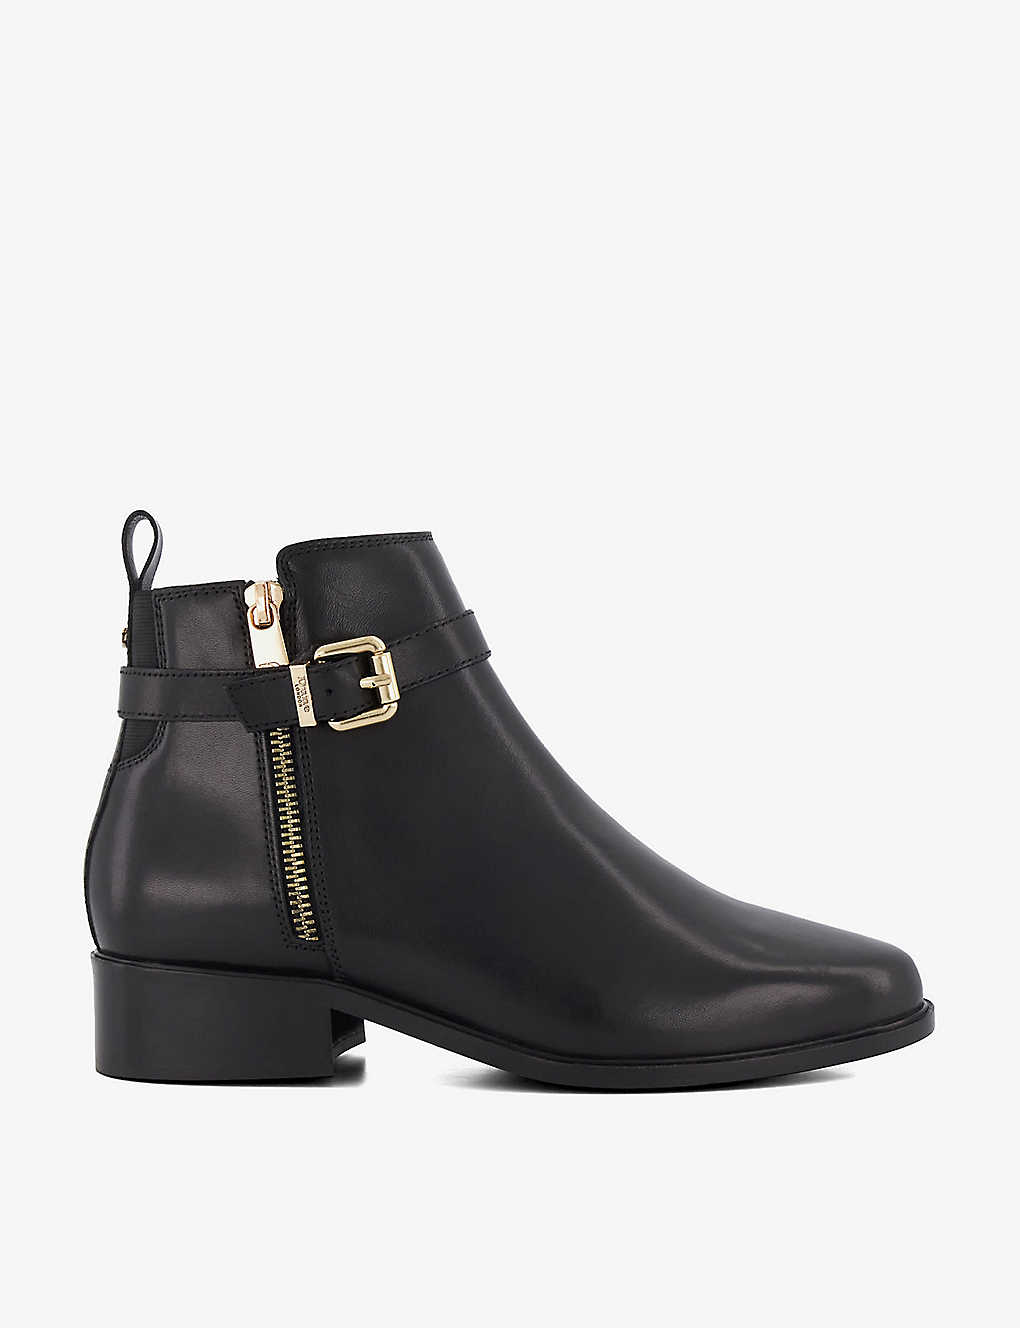 Dune Womens Black-leather Pepi Buckle-embellished Leather Ankle Boots